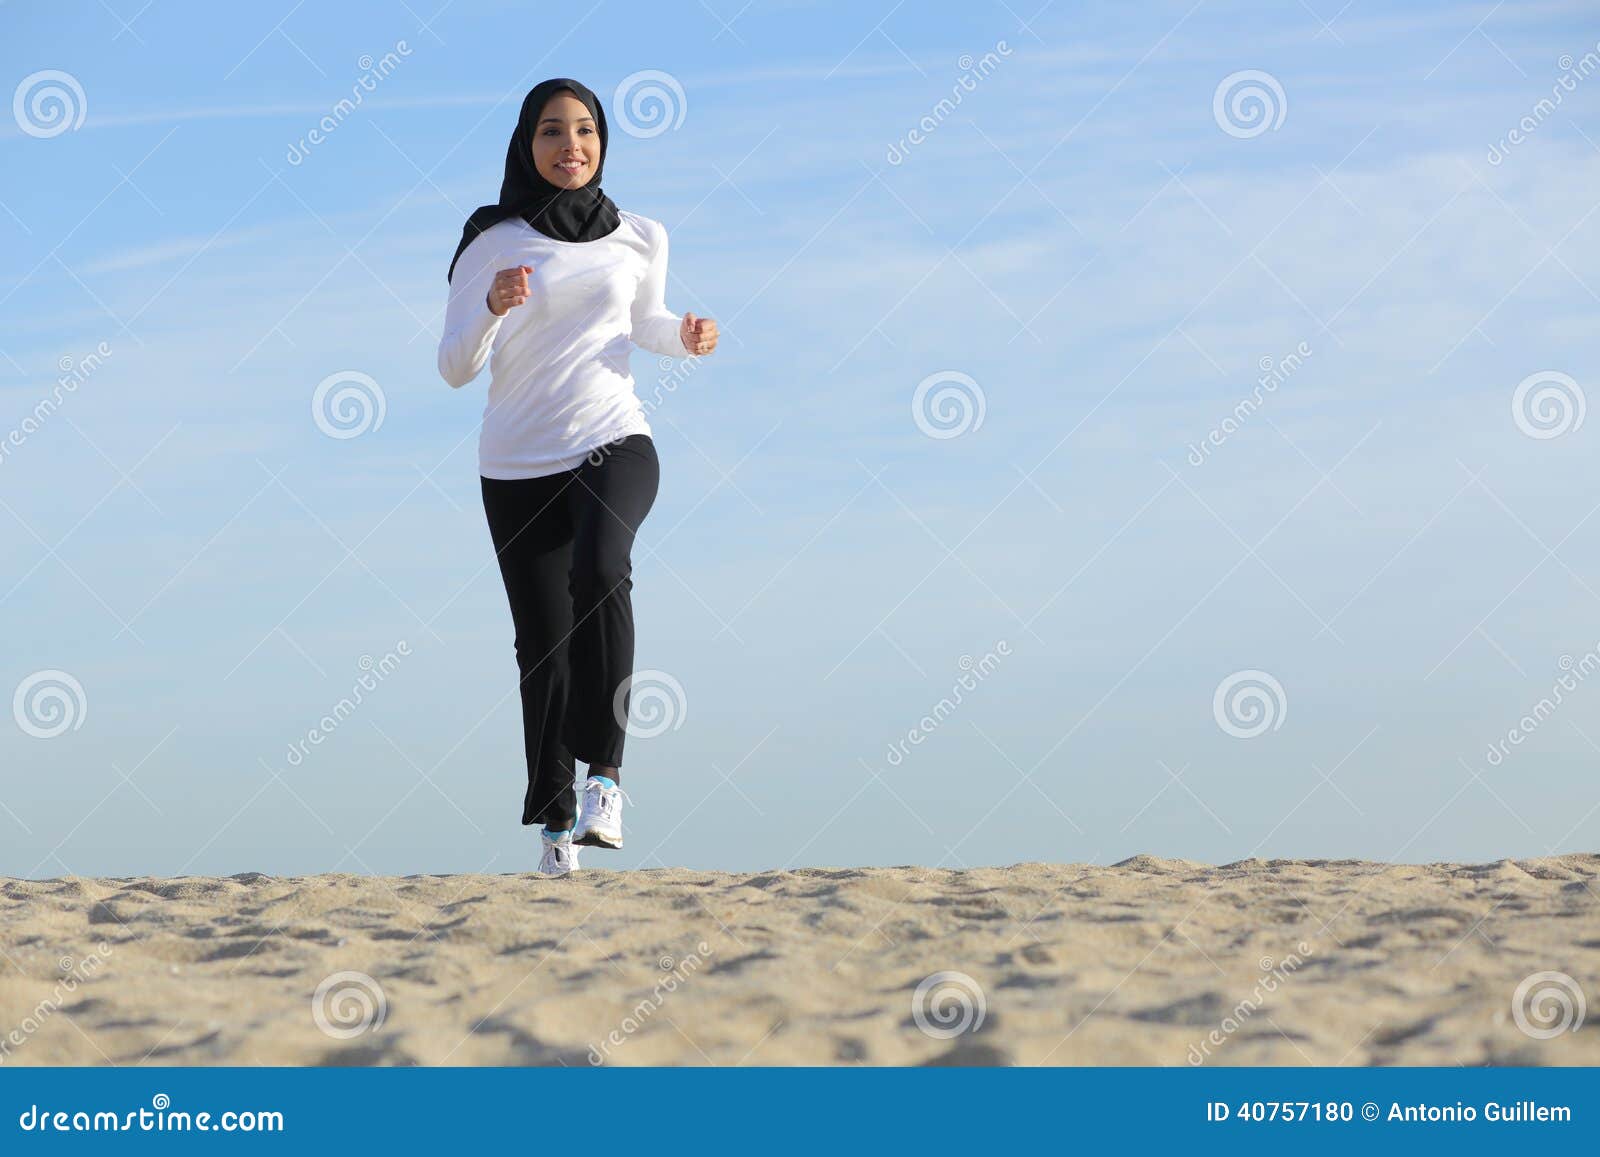 front view of an arab saudi emirates woman running on the beach